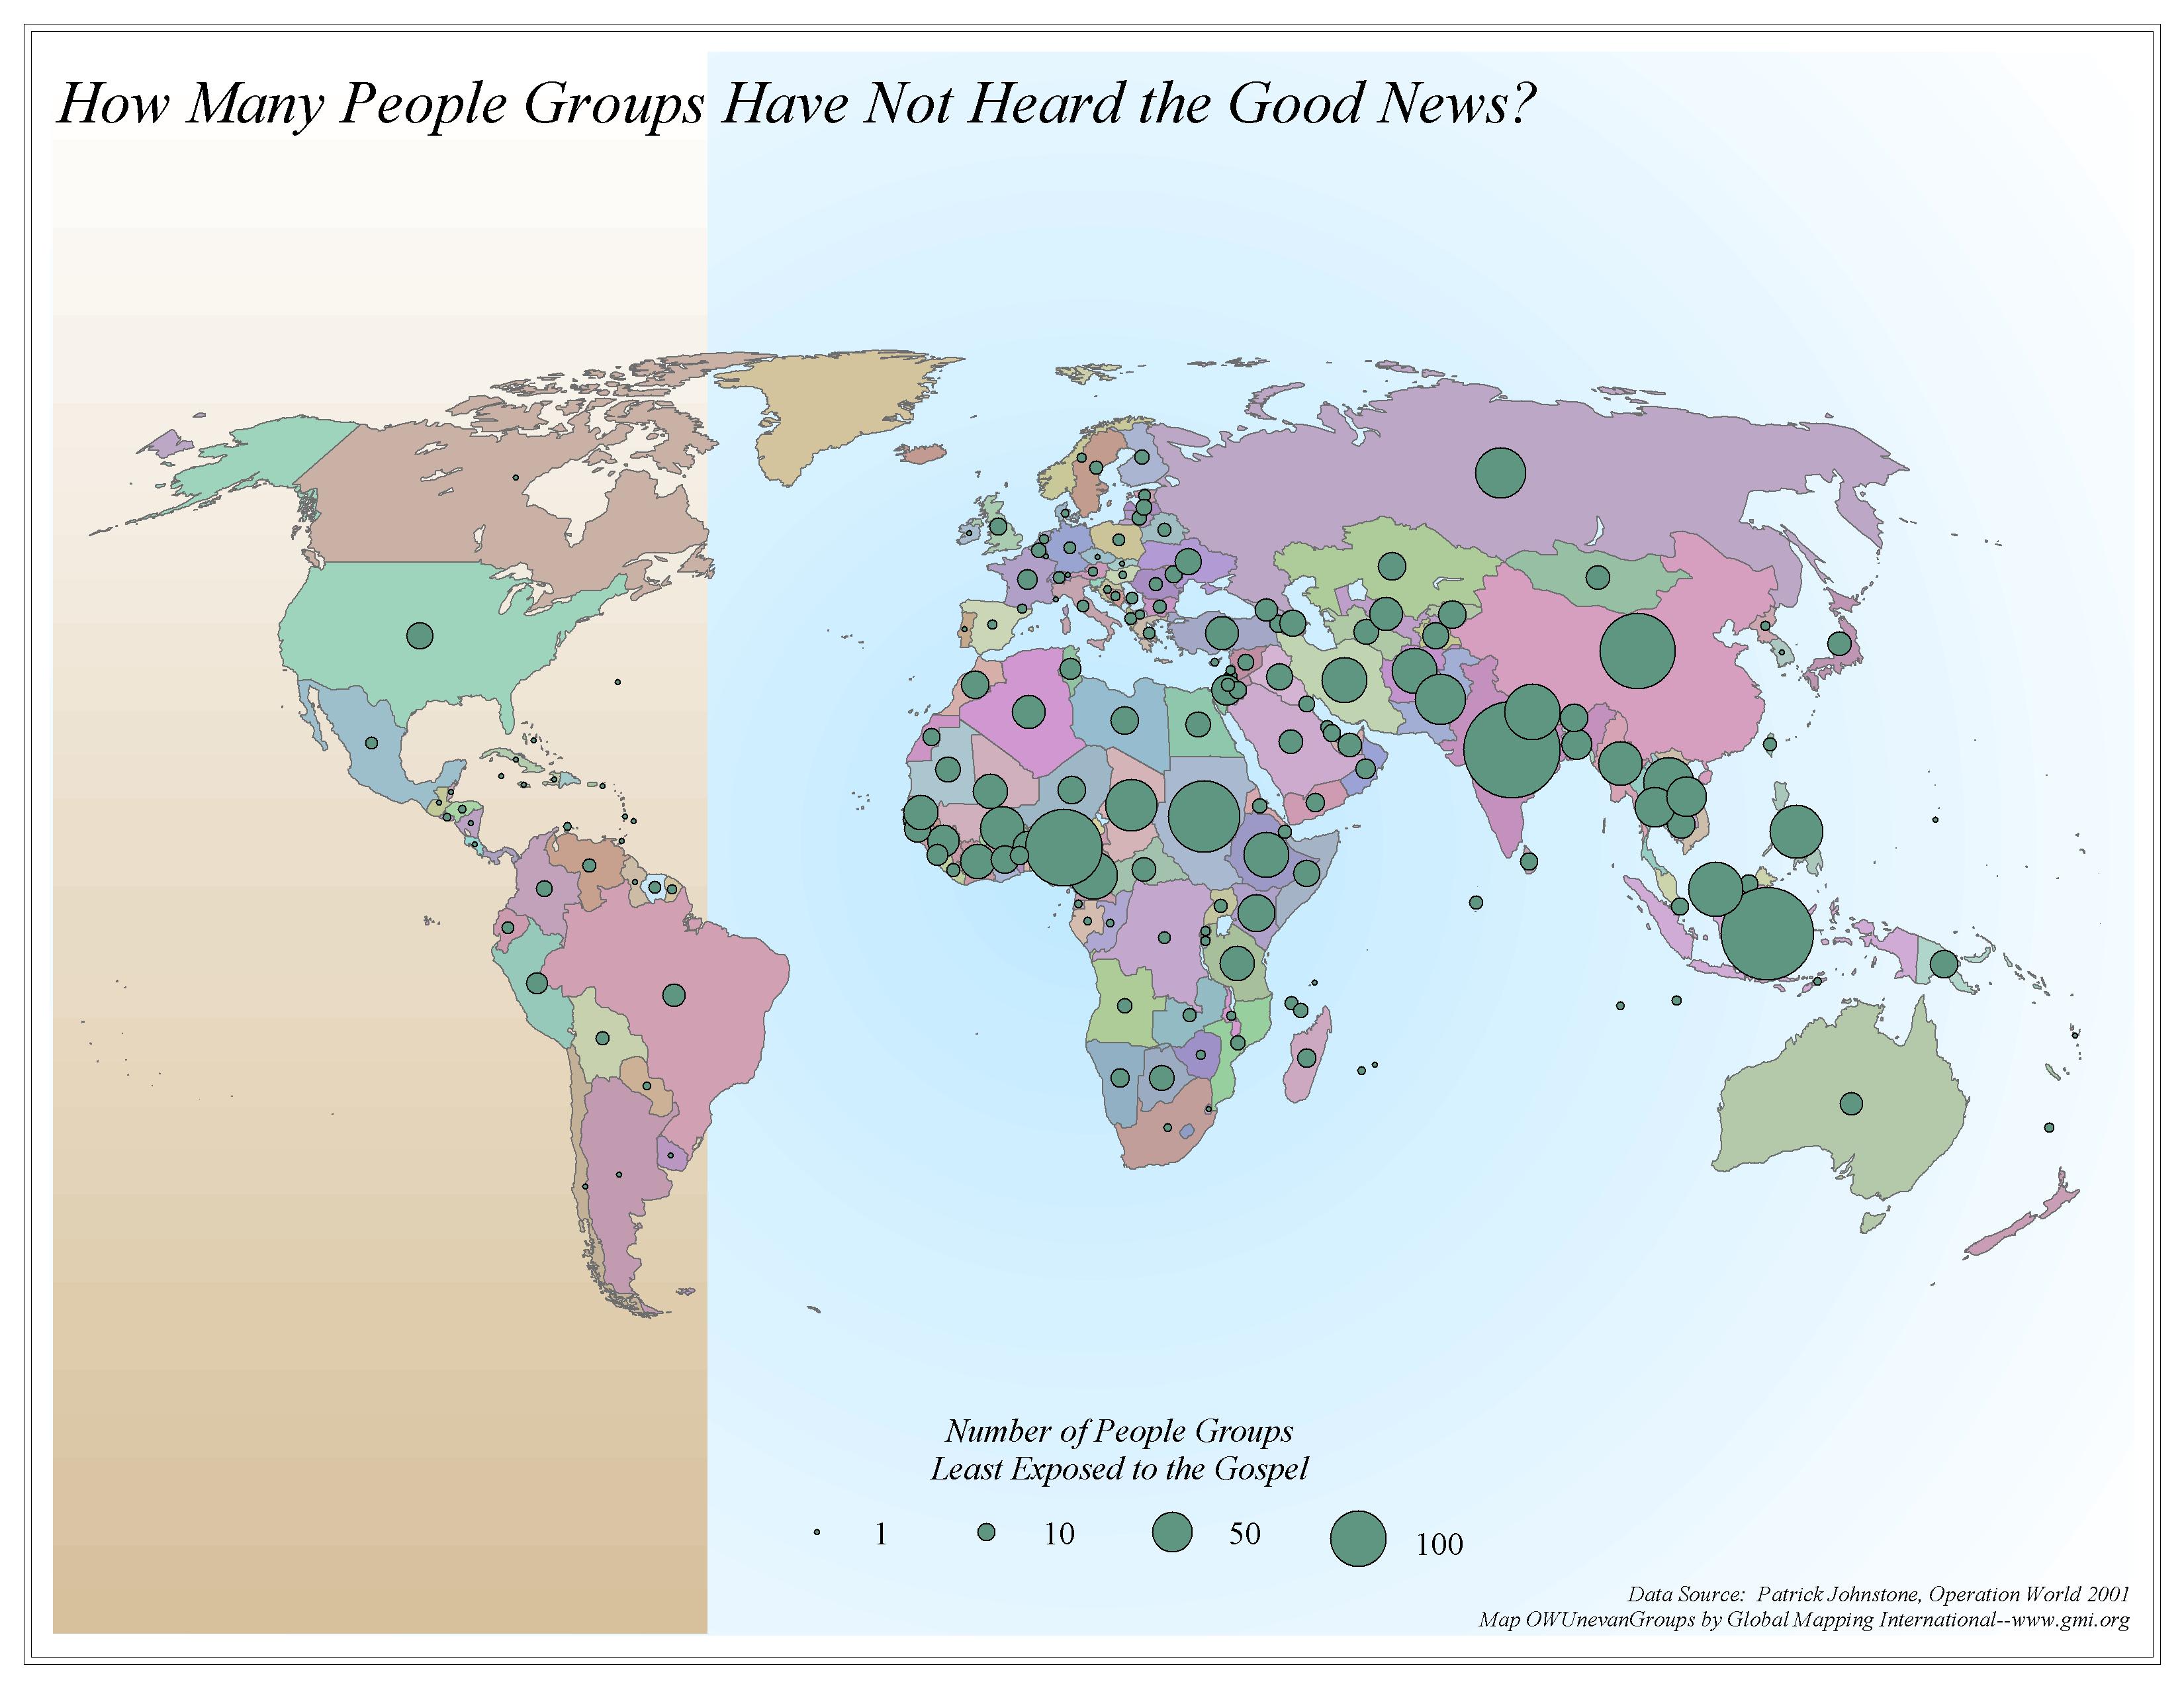 How Many People Groups Have Not Heard the Good News?